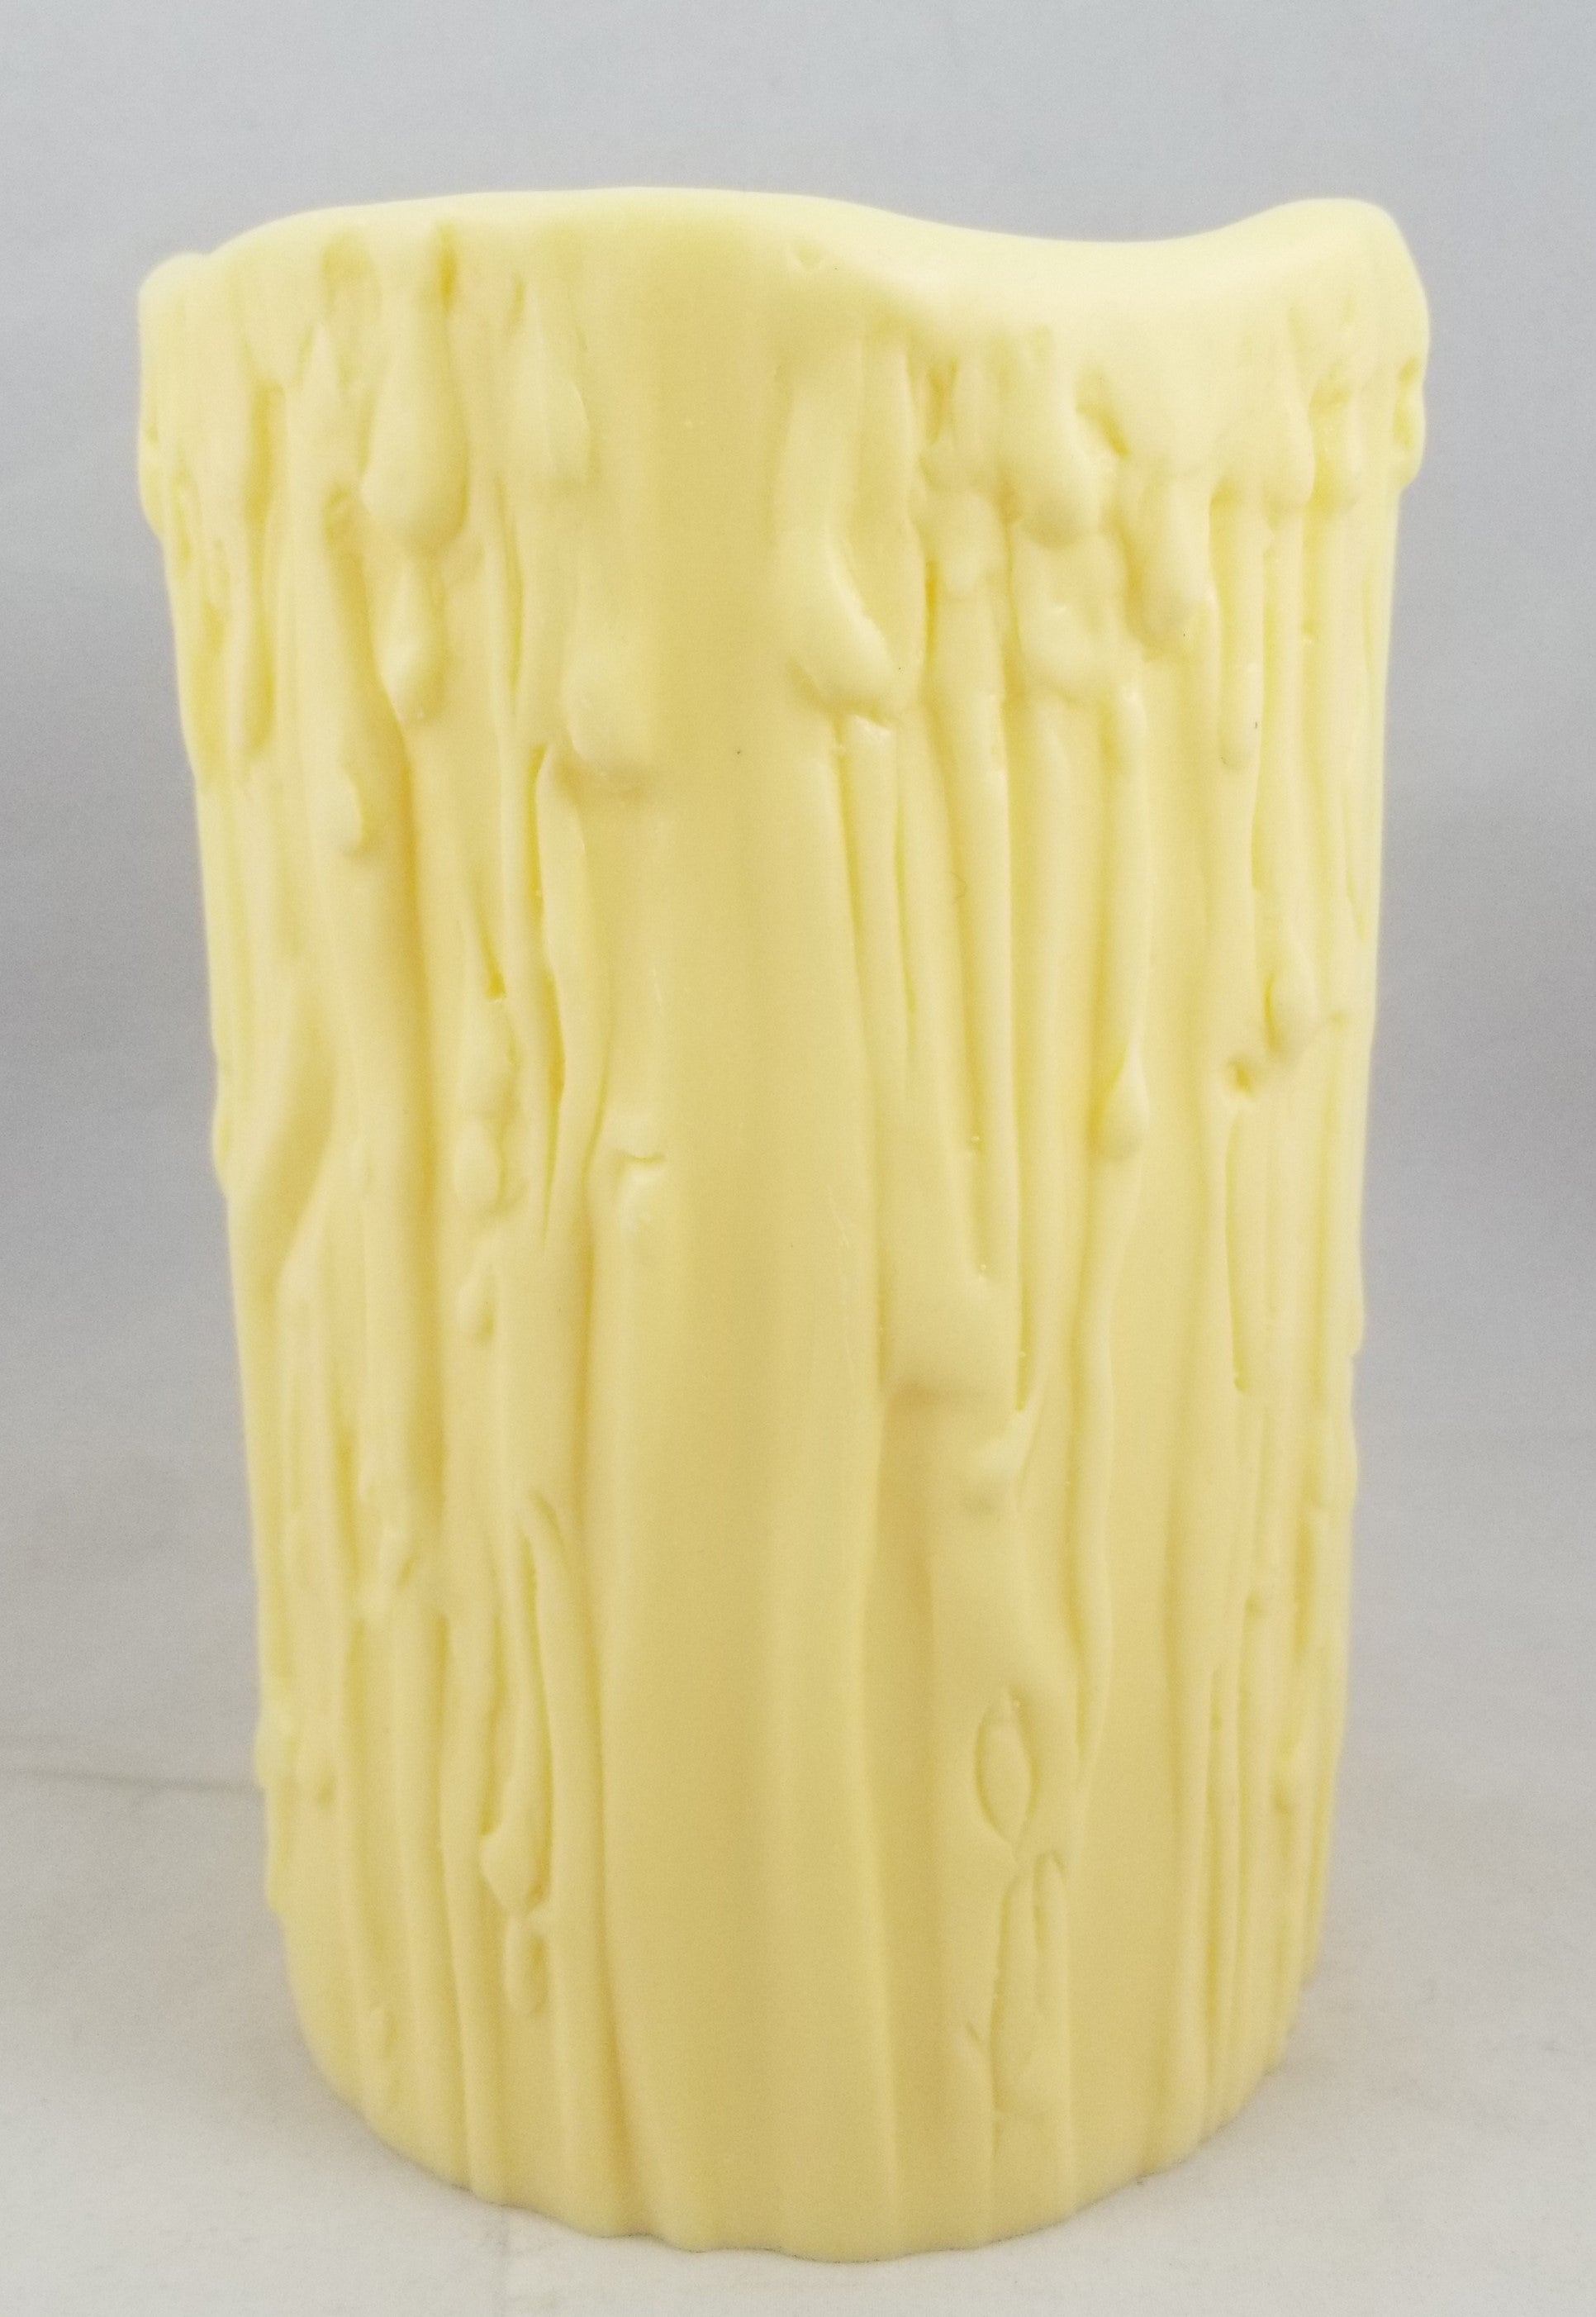 Ivory drip candle cover - 4 inches tall.